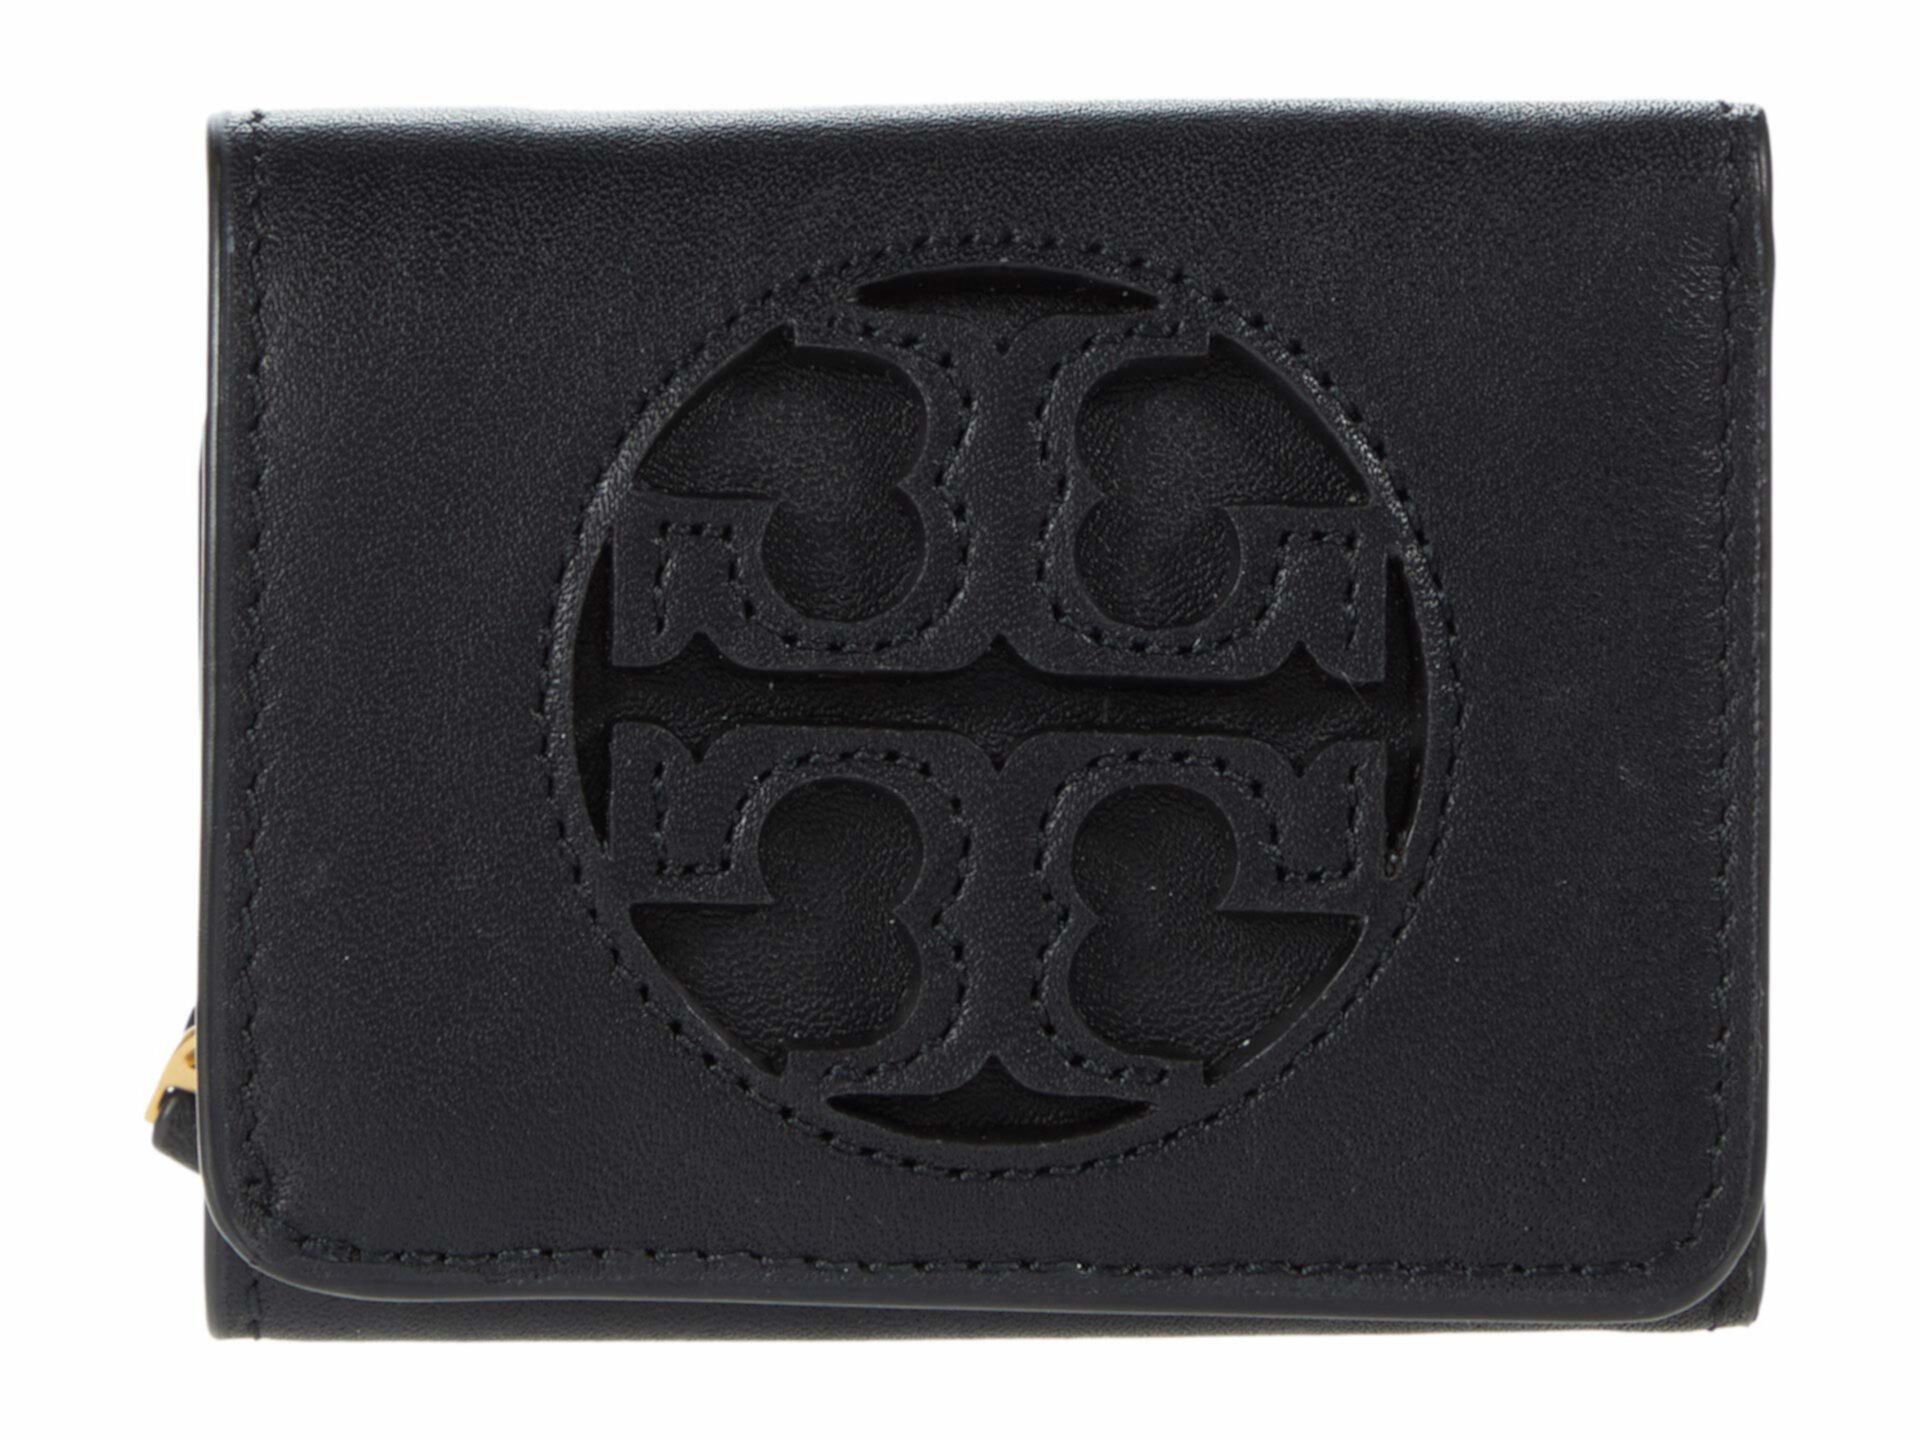 Miller Trifold Микро Кошелек Tory Burch